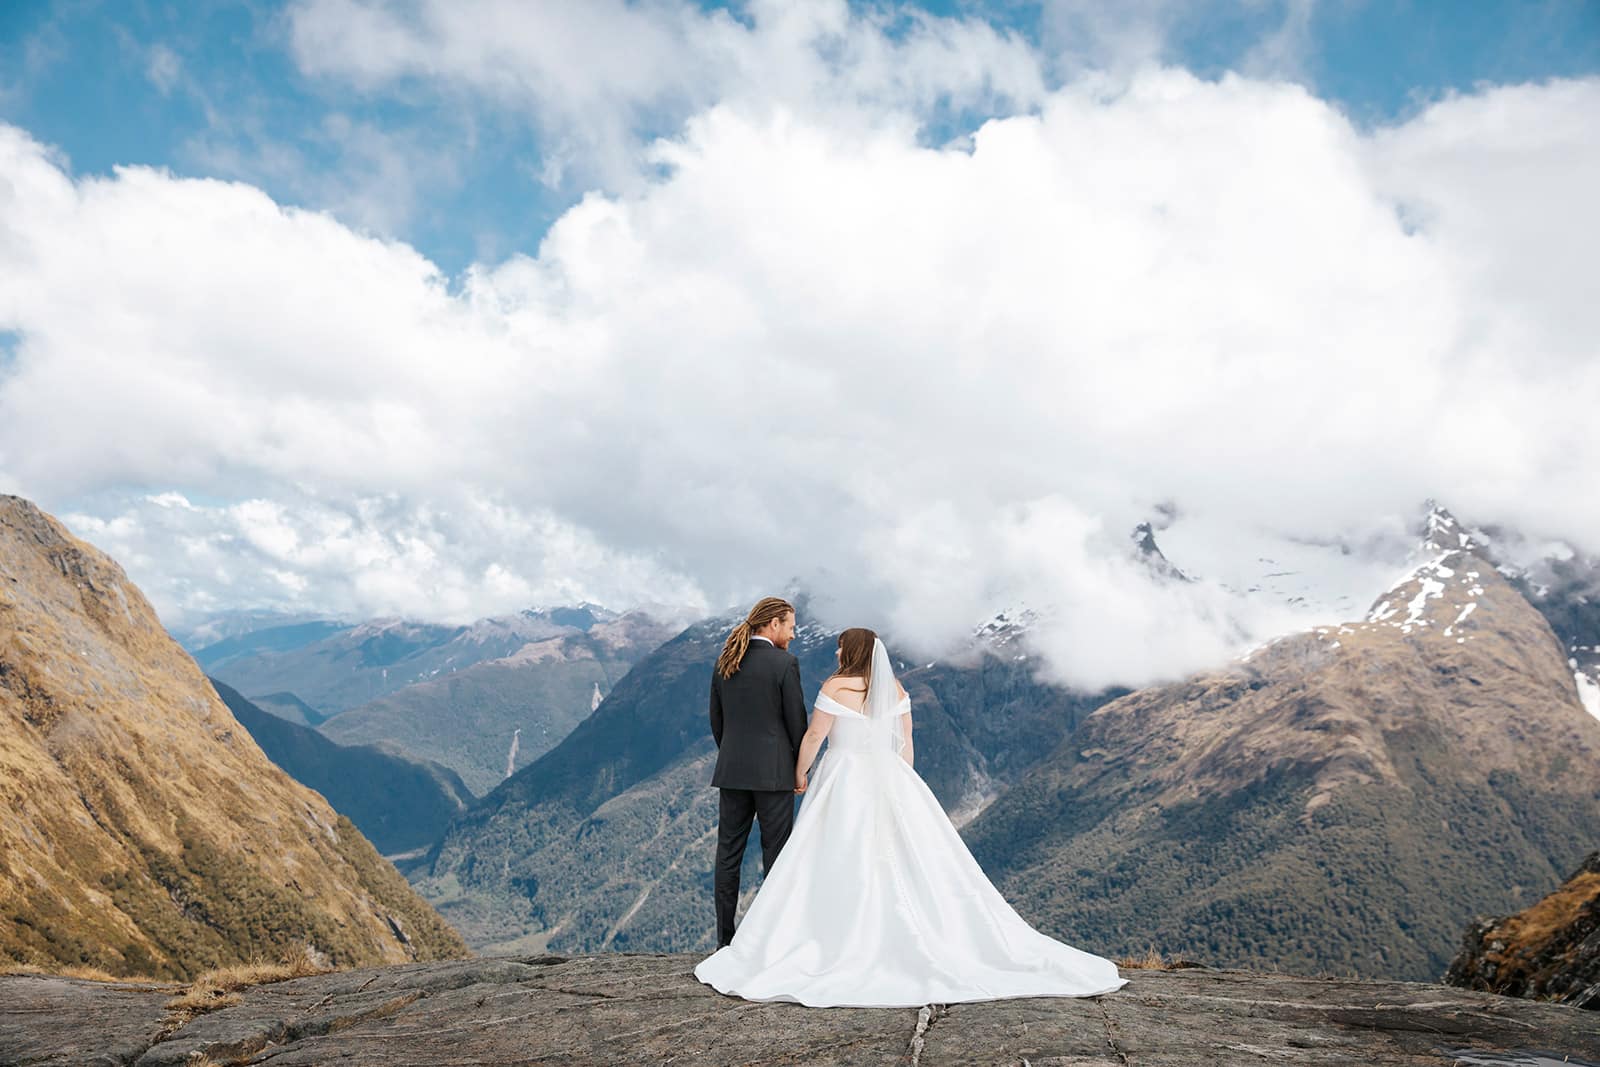 Milford Sounds Heli Wedding Package with ceremony at Lake Erskine